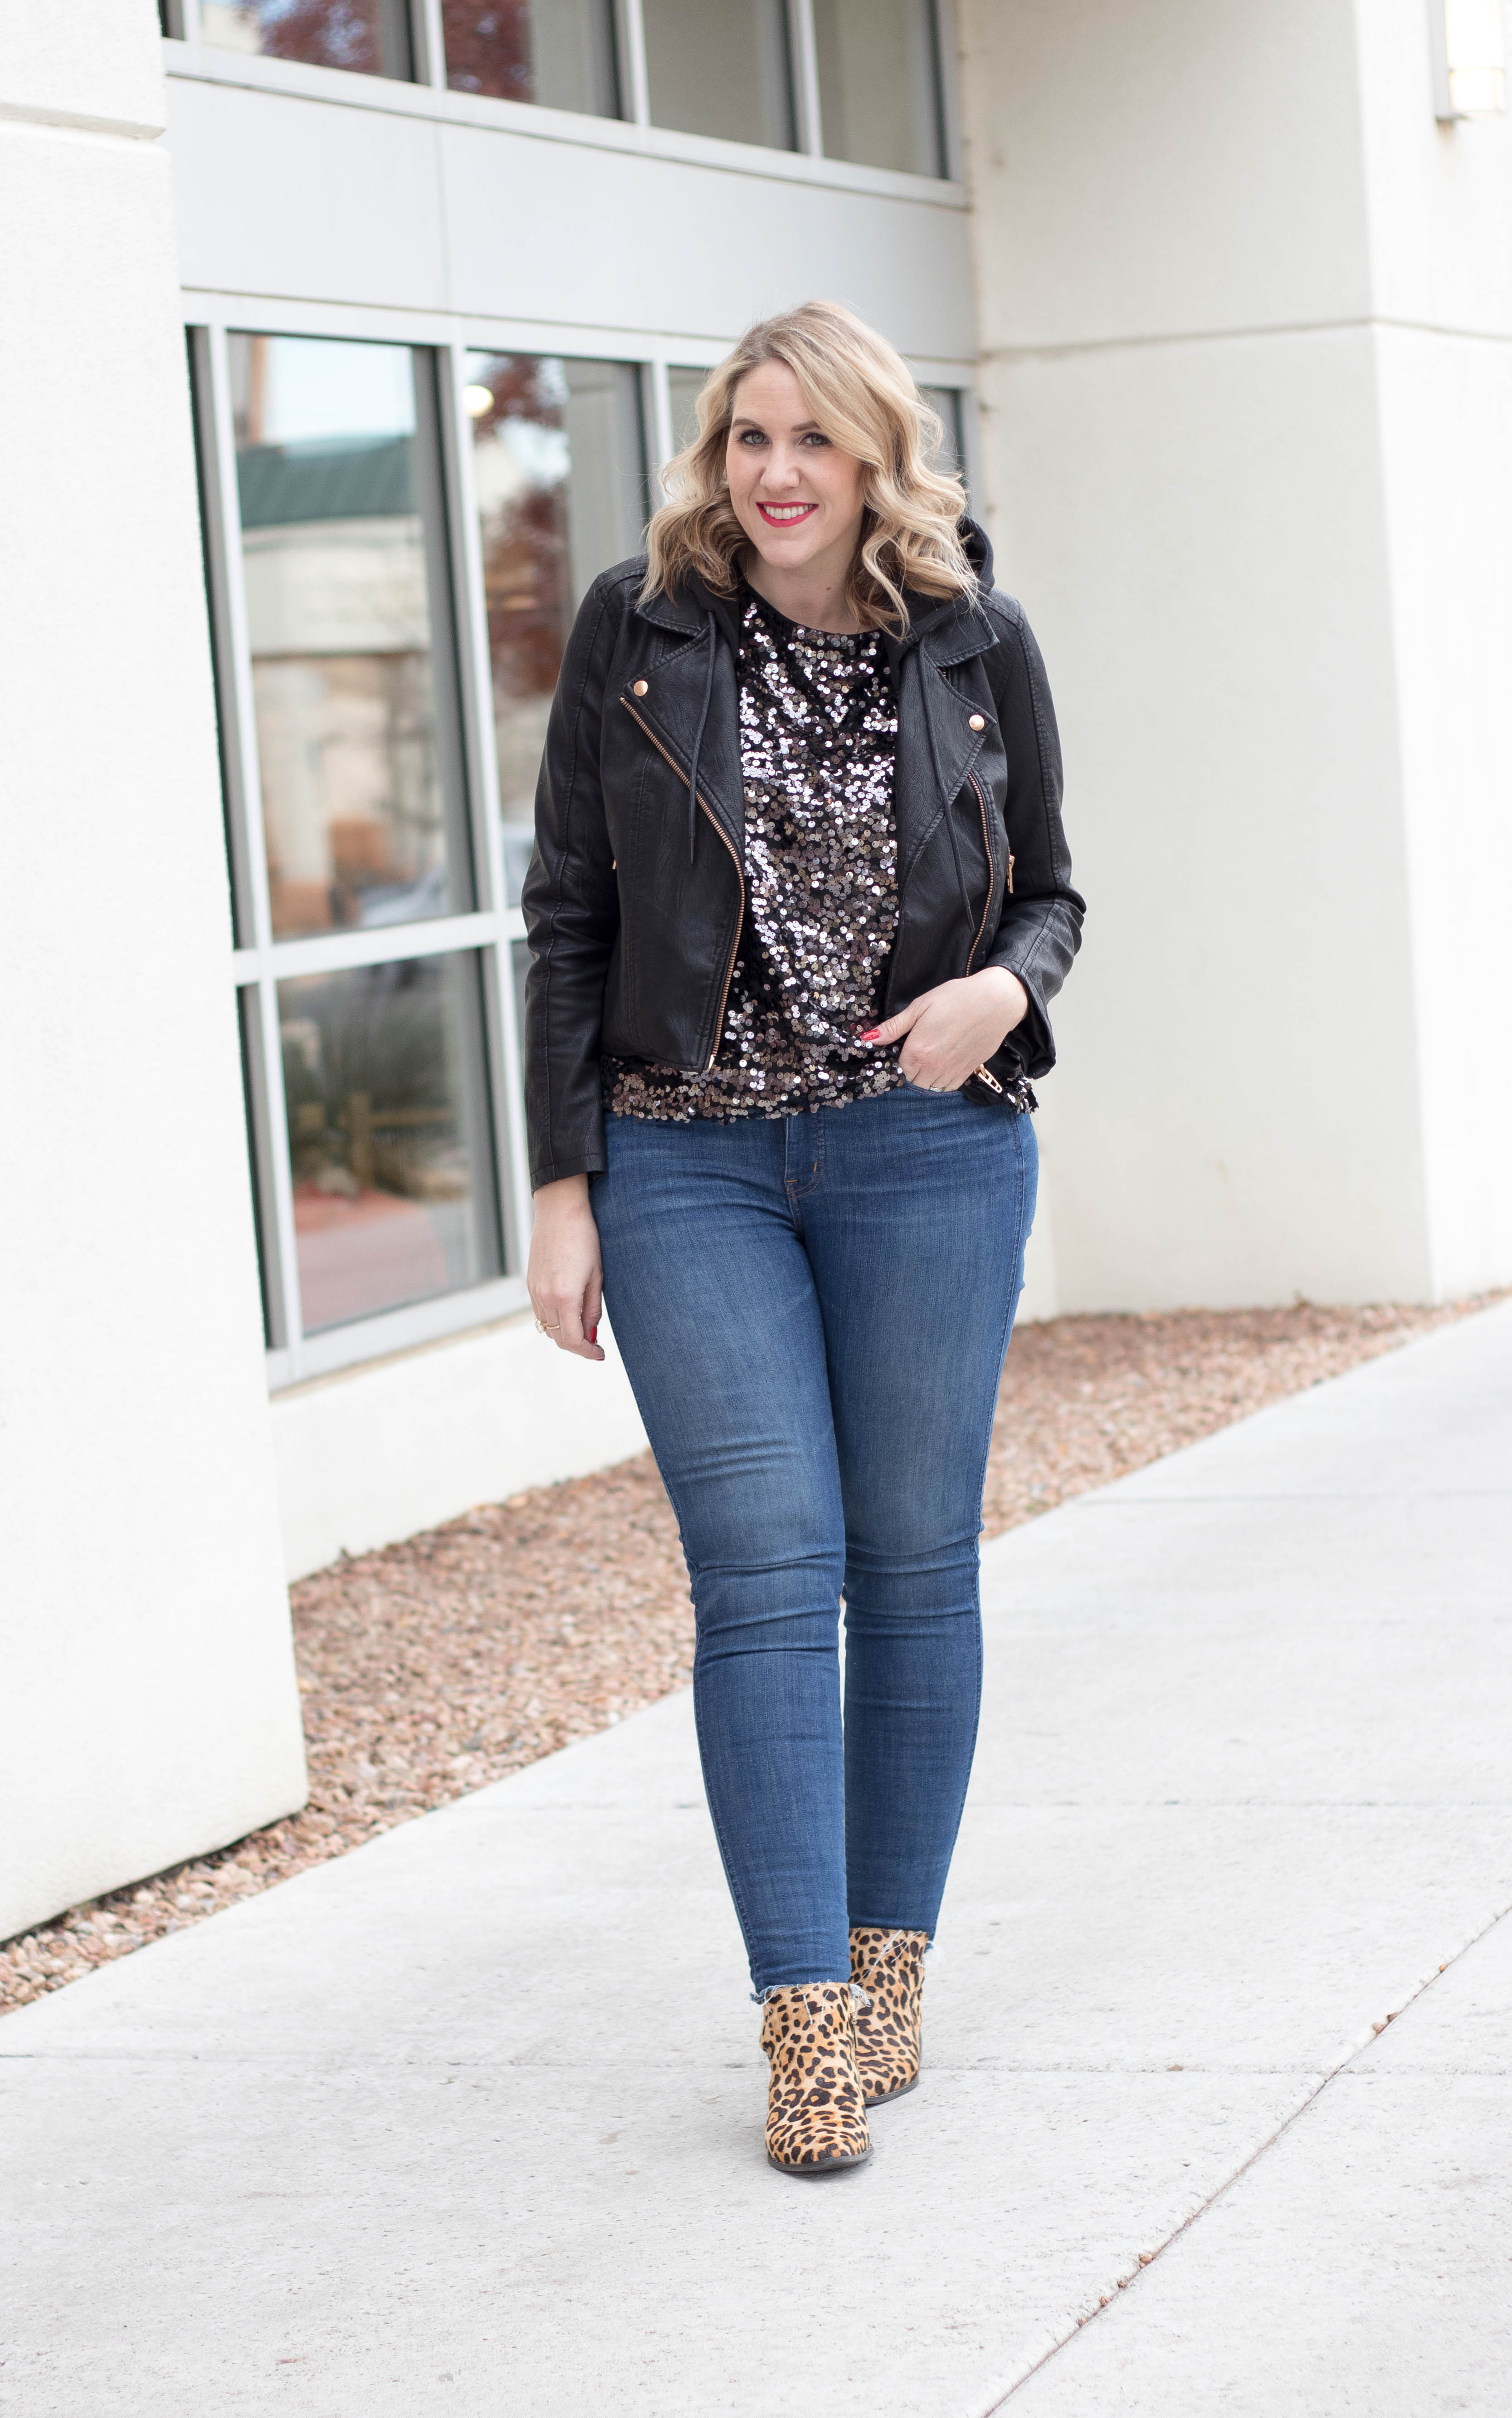 casual holiday style sequin top #theweeklystyleedit #holidaystyle #winterfashion